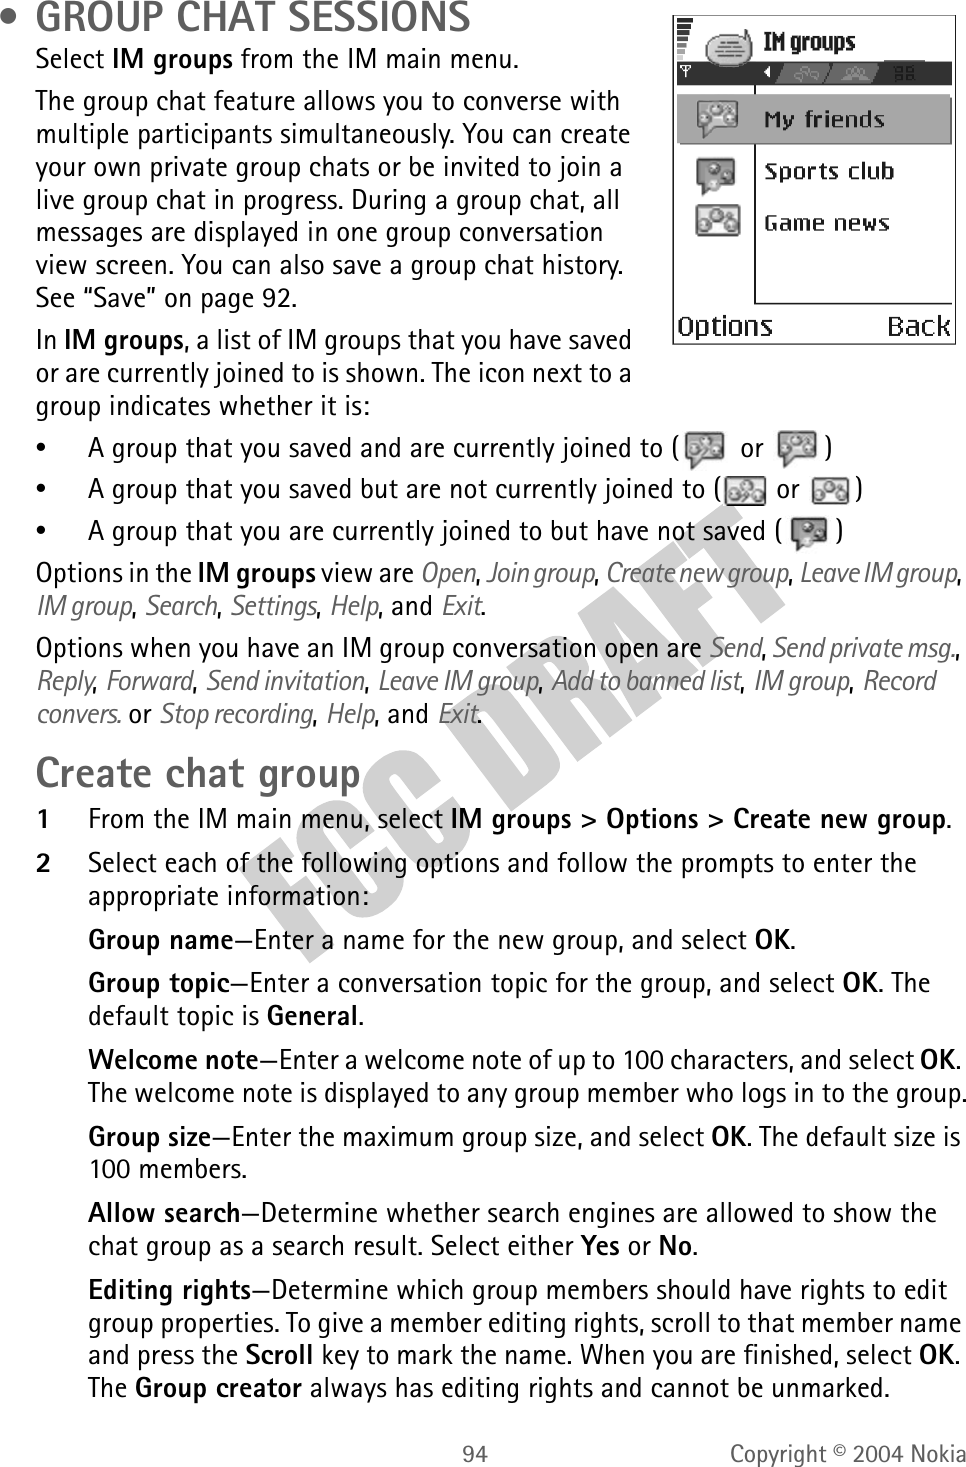 94 Copyright © 2004 Nokia • GROUP CHAT SESSIONSSelect IM groups from the IM main menu.The group chat feature allows you to converse with multiple participants simultaneously. You can create your own private group chats or be invited to join a live group chat in progress. During a group chat, all messages are displayed in one group conversation view screen. You can also save a group chat history. See “Save” on page 92.In IM groups, a list of IM groups that you have saved or are currently joined to is shown. The icon next to a group indicates whether it is:•A group that you saved and are currently joined to (  or  )•A group that you saved but are not currently joined to (  or  )•A group that you are currently joined to but have not saved ( )Options in the IM groups view are Open, Join group, Create new group, Leave IM group, IM group, Search, Settings, Help, and Exit.Options when you have an IM group conversation open are Send, Send private msg., Reply, Forward, Send invitation, Leave IM group, Add to banned list, IM group, Record convers. or Stop recording, Help, and Exit.Create chat group1From the IM main menu, select IM groups &gt; Options &gt; Create new group.2Select each of the following options and follow the prompts to enter the appropriate information:Group name—Enter a name for the new group, and select OK.Group topic—Enter a conversation topic for the group, and select OK. The default topic is General.Welcome note—Enter a welcome note of up to 100 characters, and select OK. The welcome note is displayed to any group member who logs in to the group.Group size—Enter the maximum group size, and select OK. The default size is 100 members.Allow search—Determine whether search engines are allowed to show the chat group as a search result. Select either Yes or No.Editing rights—Determine which group members should have rights to edit group properties. To give a member editing rights, scroll to that member name and press the Scroll key to mark the name. When you are finished, select OK. The Group creator always has editing rights and cannot be unmarked.